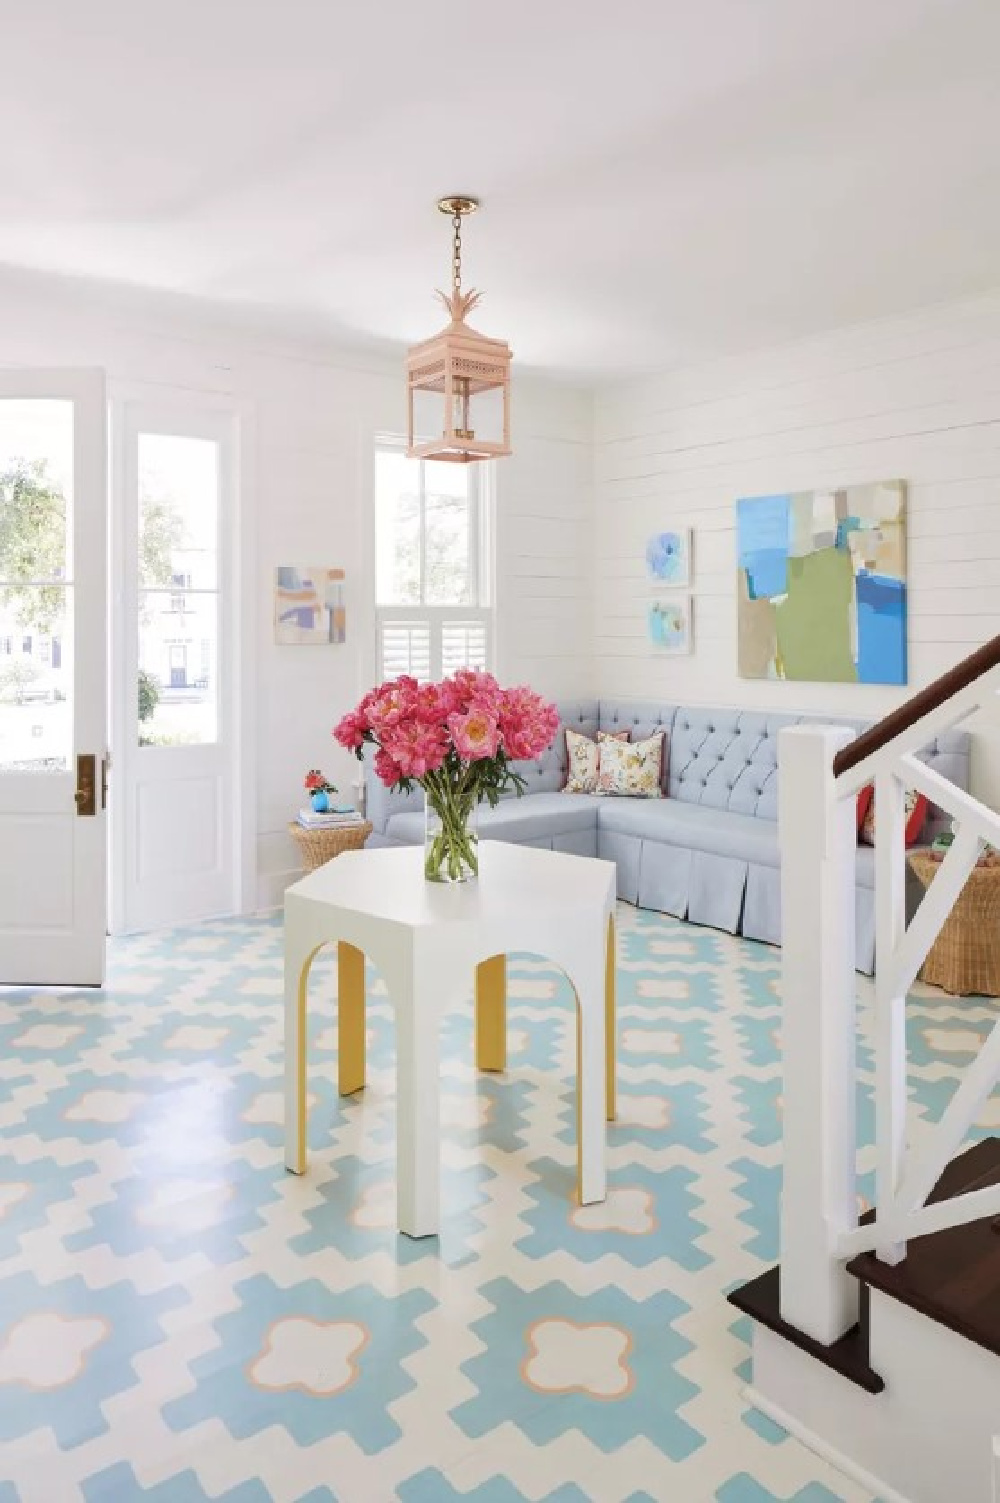 Whimsical handpainted turquoise hardwood floor (Suzanne Allen) in entry of charming Charleston home - Julia Berolzheimer's home in Southern Living (photo: Hector Manuel Sanchez). #bmsimplywhite #paintedfloor